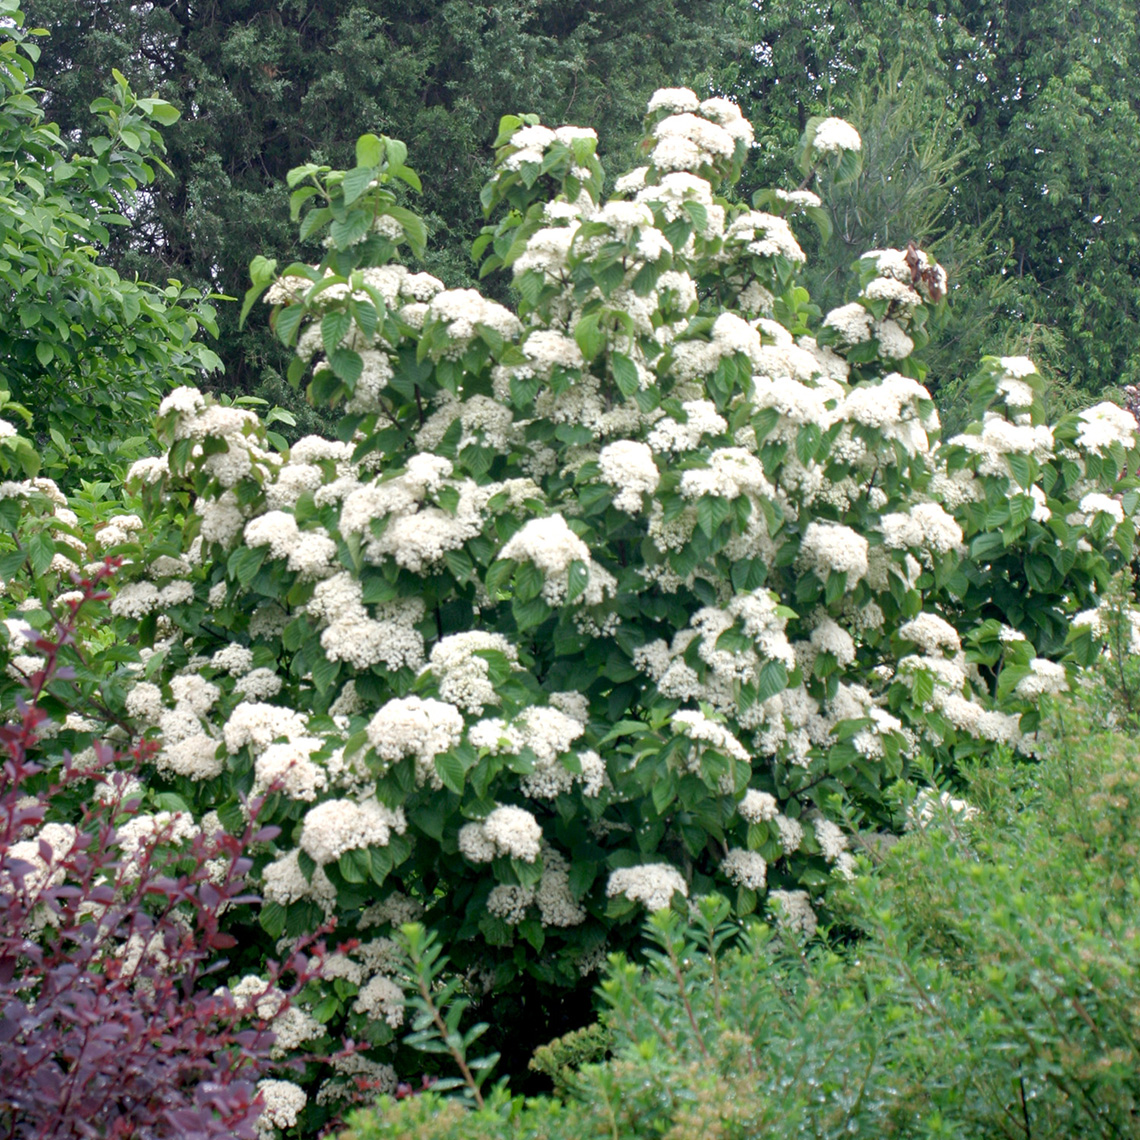 A large specimen of Cardinal Candy viburnum covered in white blooms